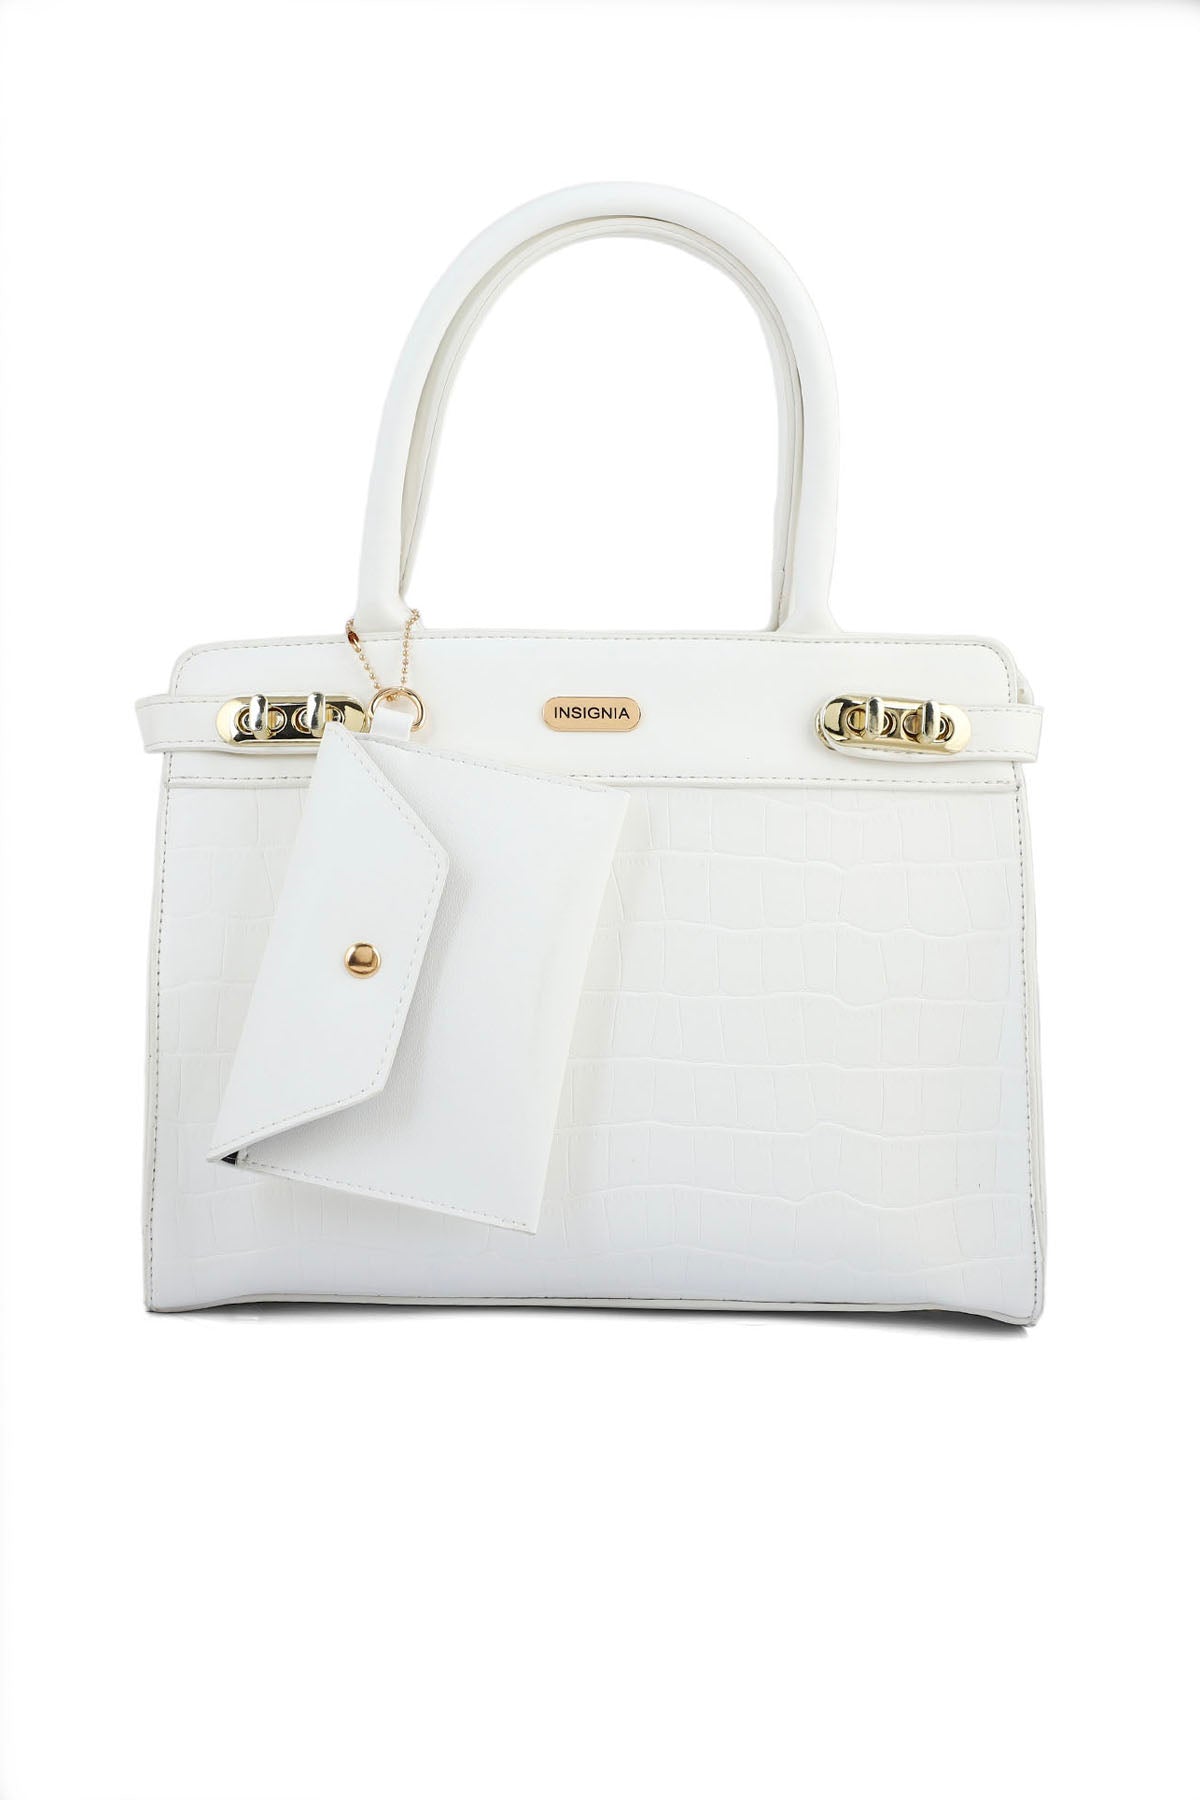 Formal Tote Hand Bags B15133-White